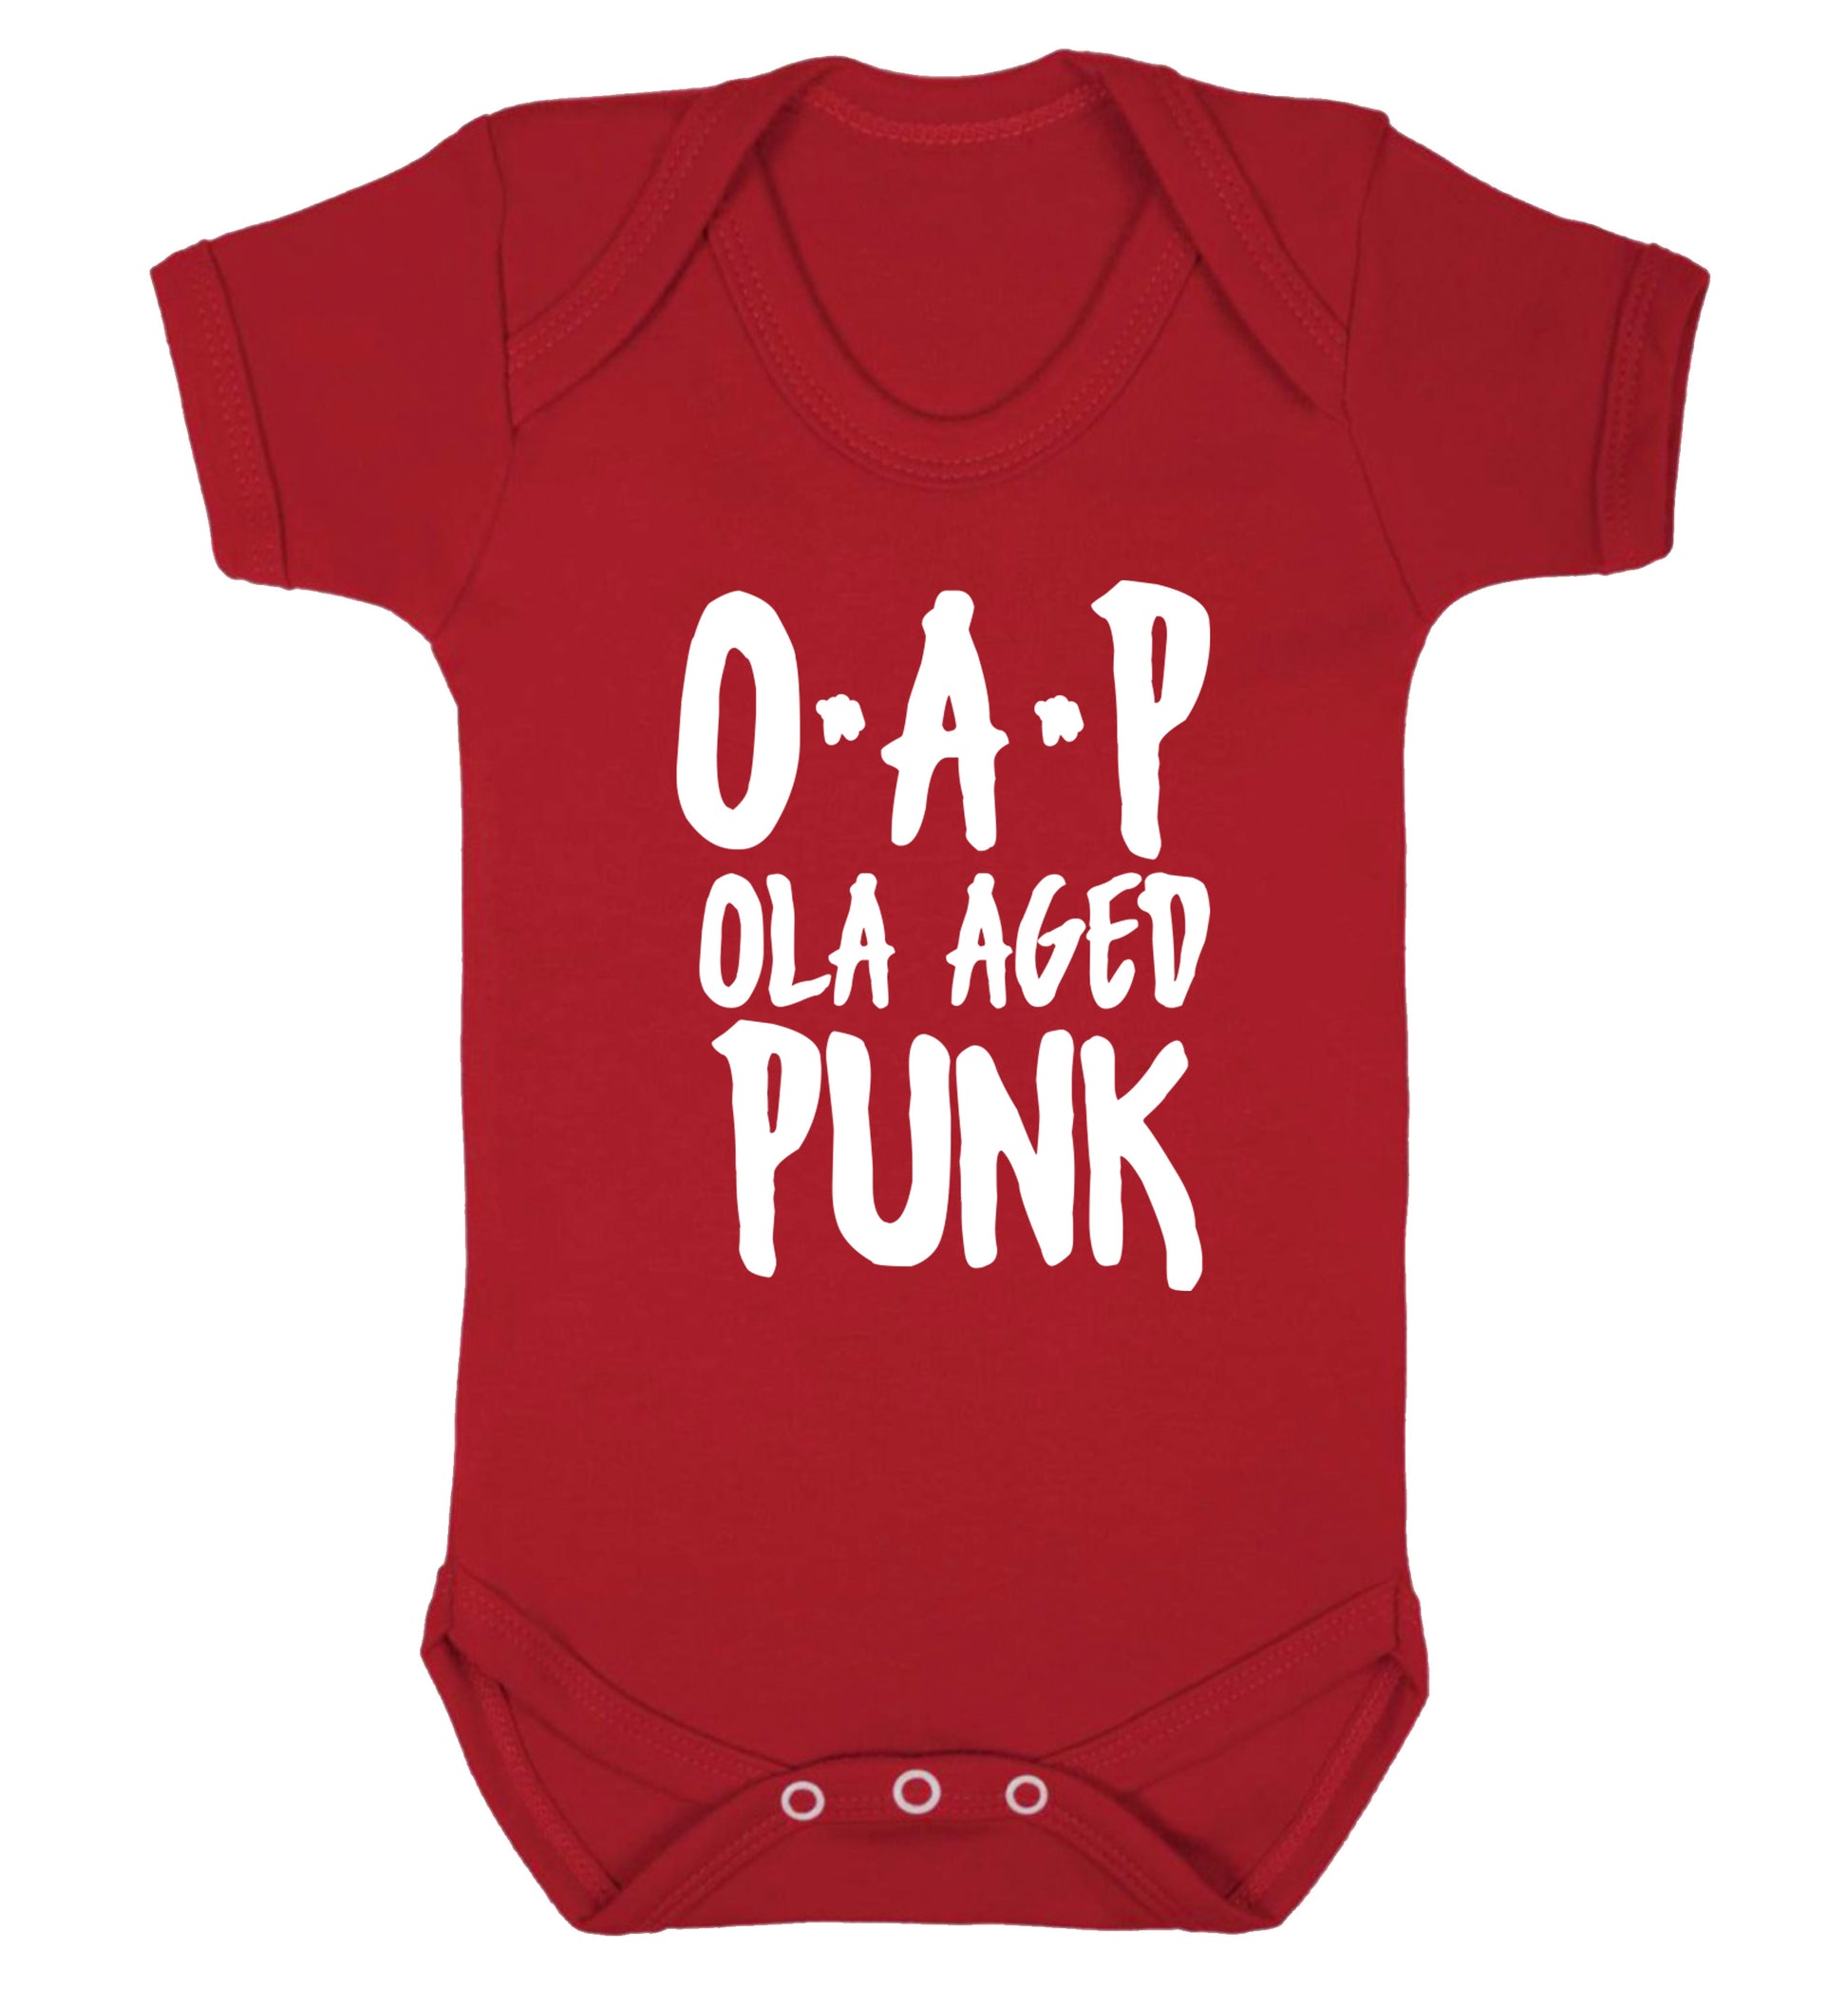 O.A.P Old Aged Punk Baby Vest red 18-24 months